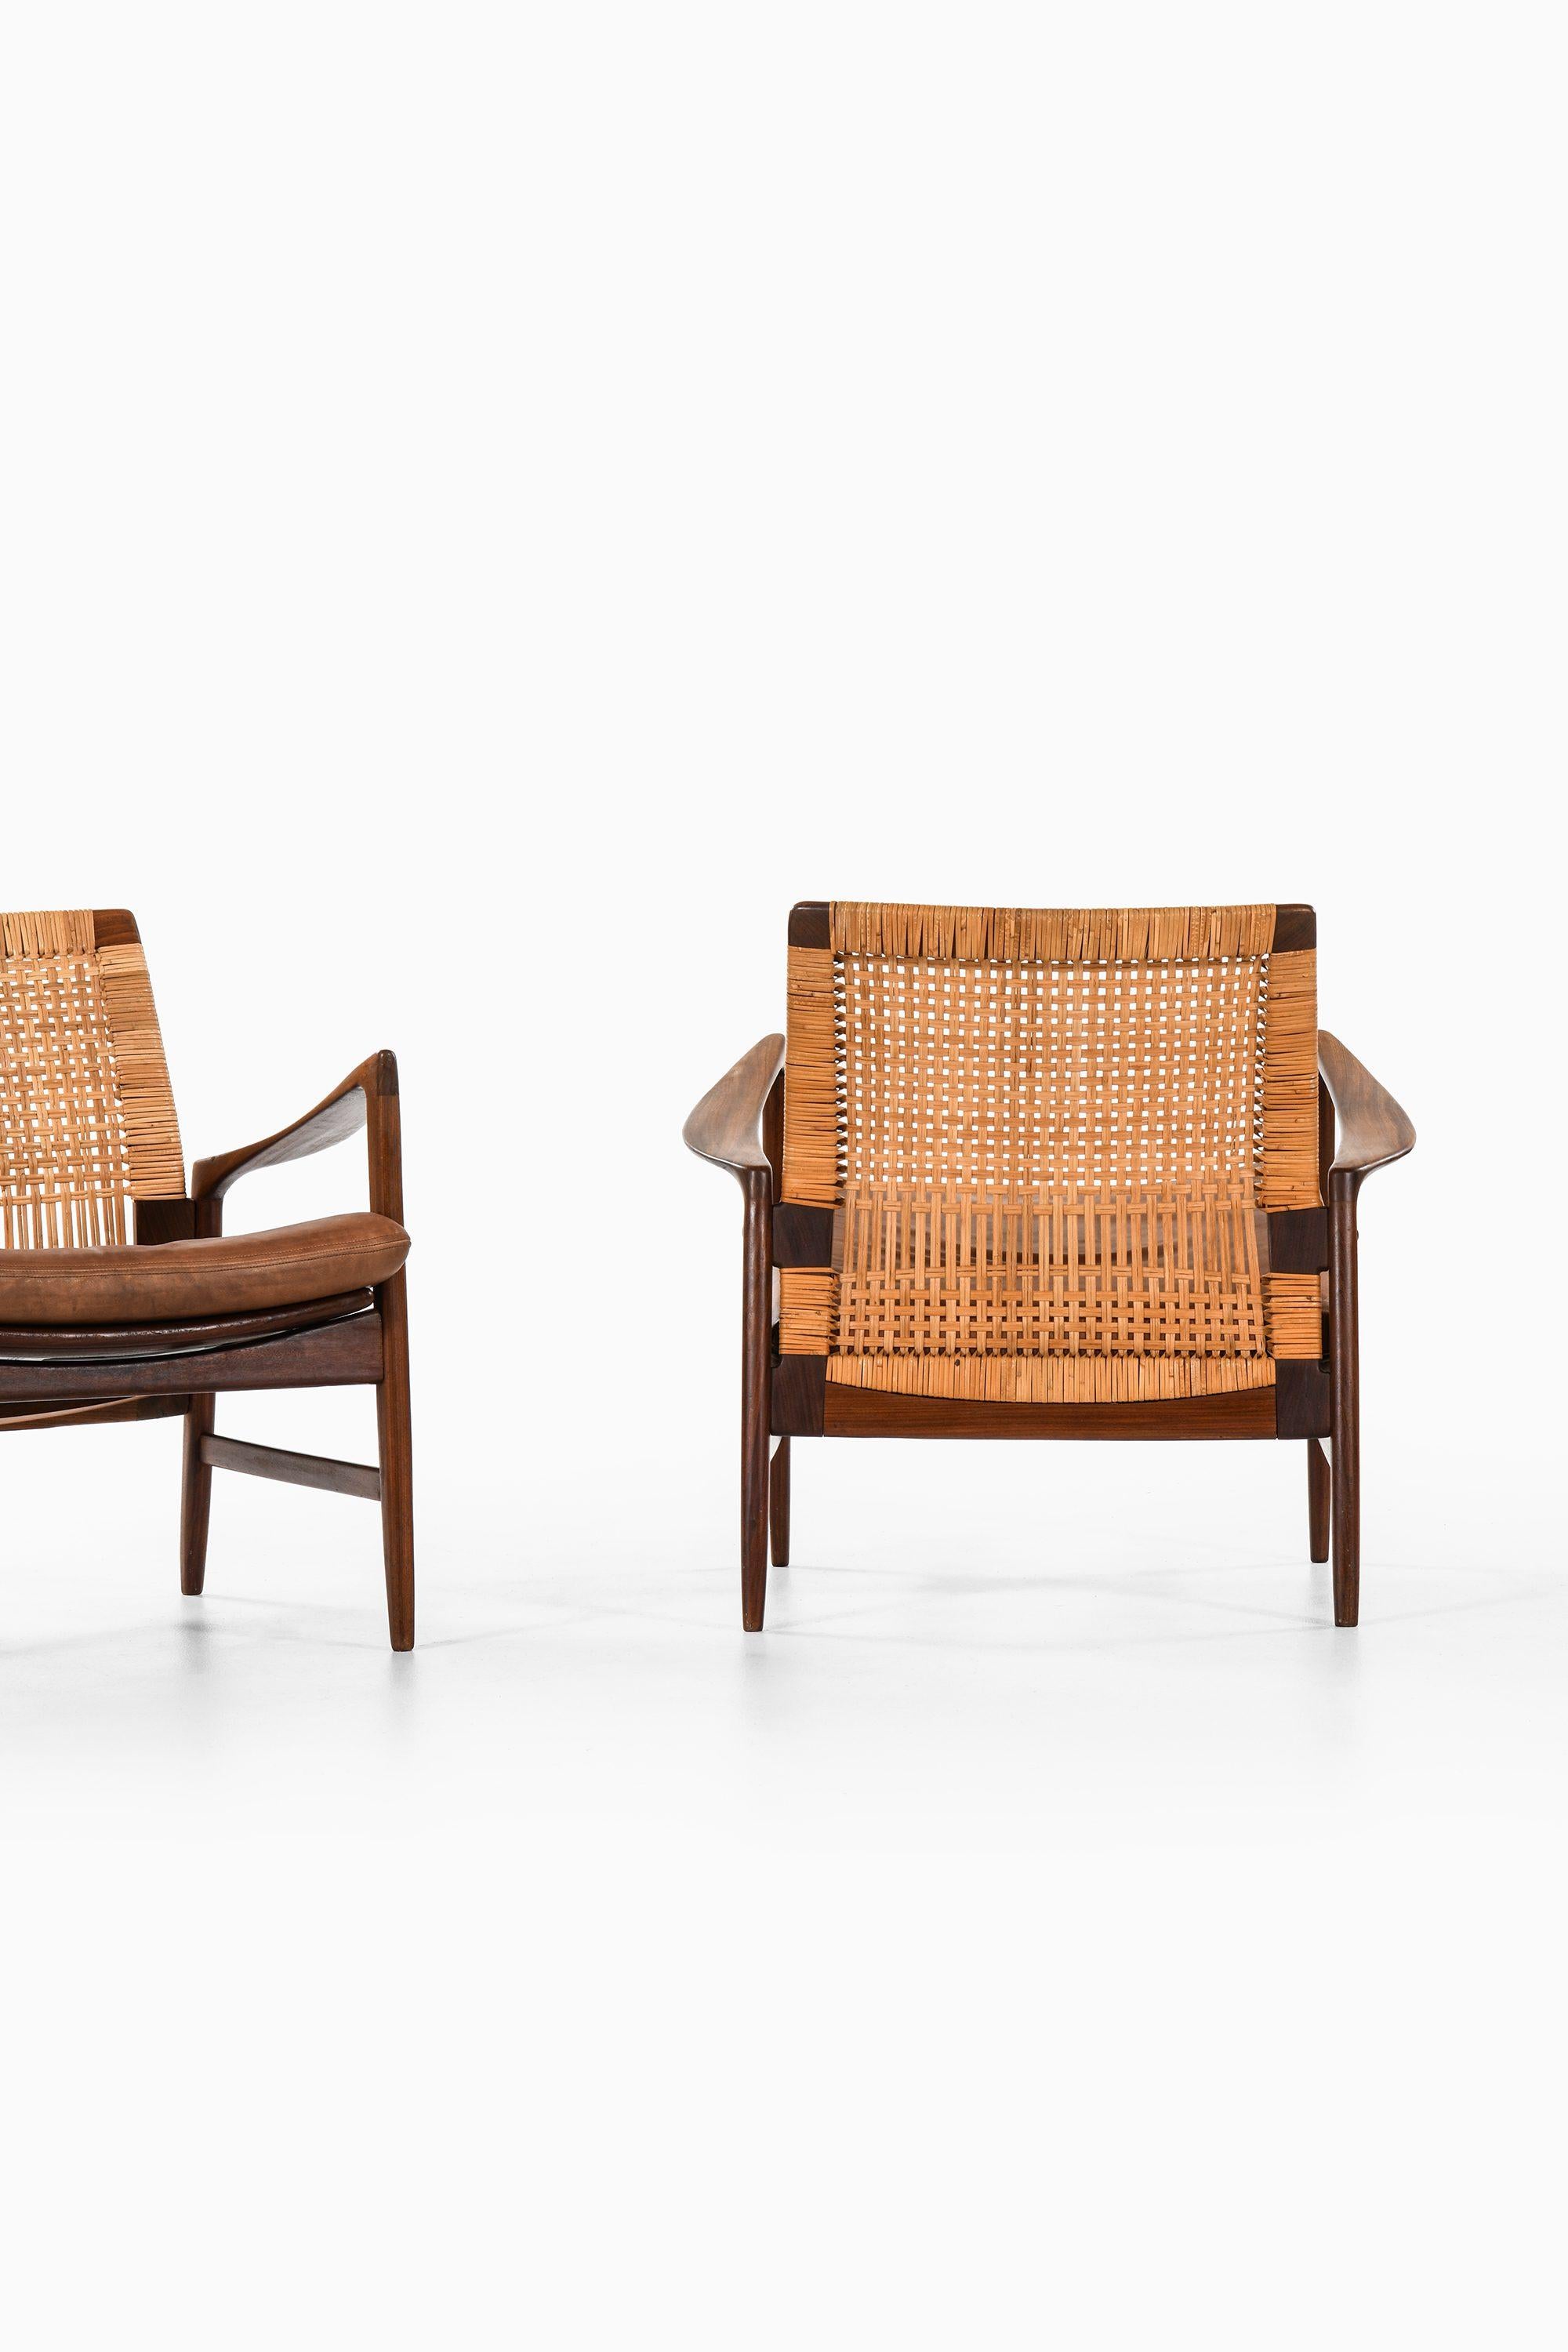 Scandinavian Modern Pair of Easy Chairs in Teak, Cane with Brown Leather by Ib Kofod-Larsen, 1950s